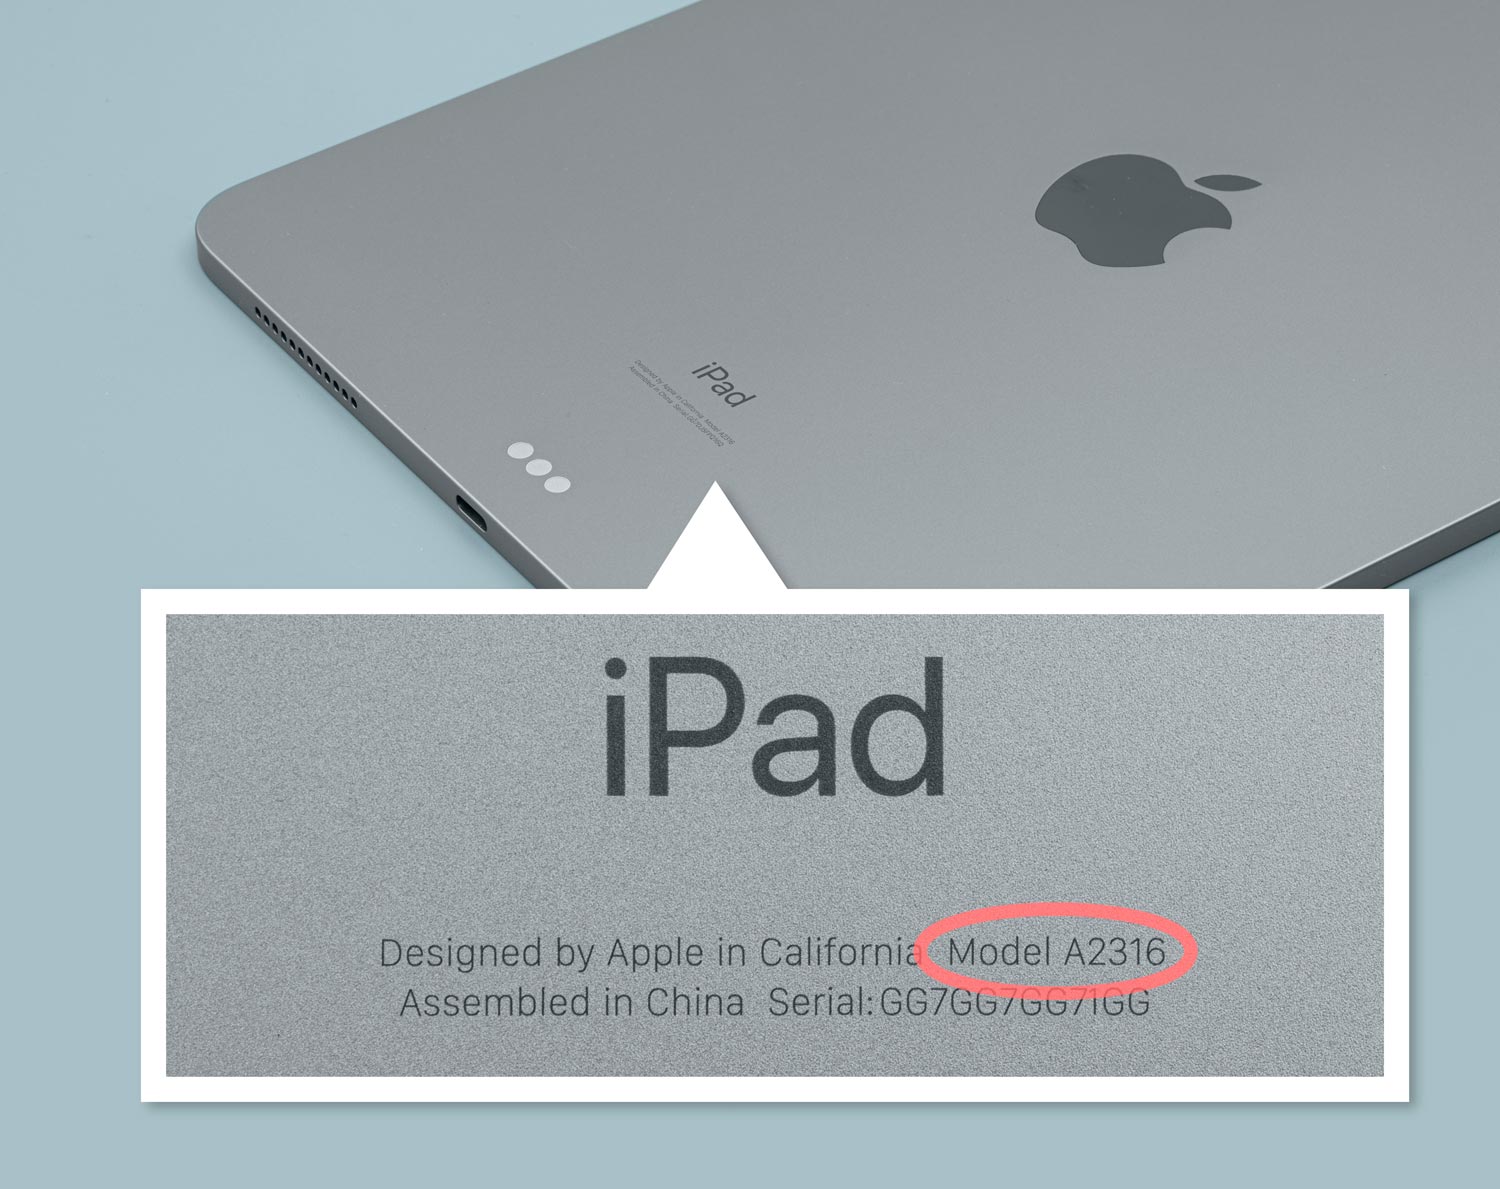 Flip your iPad over, and find the ‘iPad’ label on the bottom.